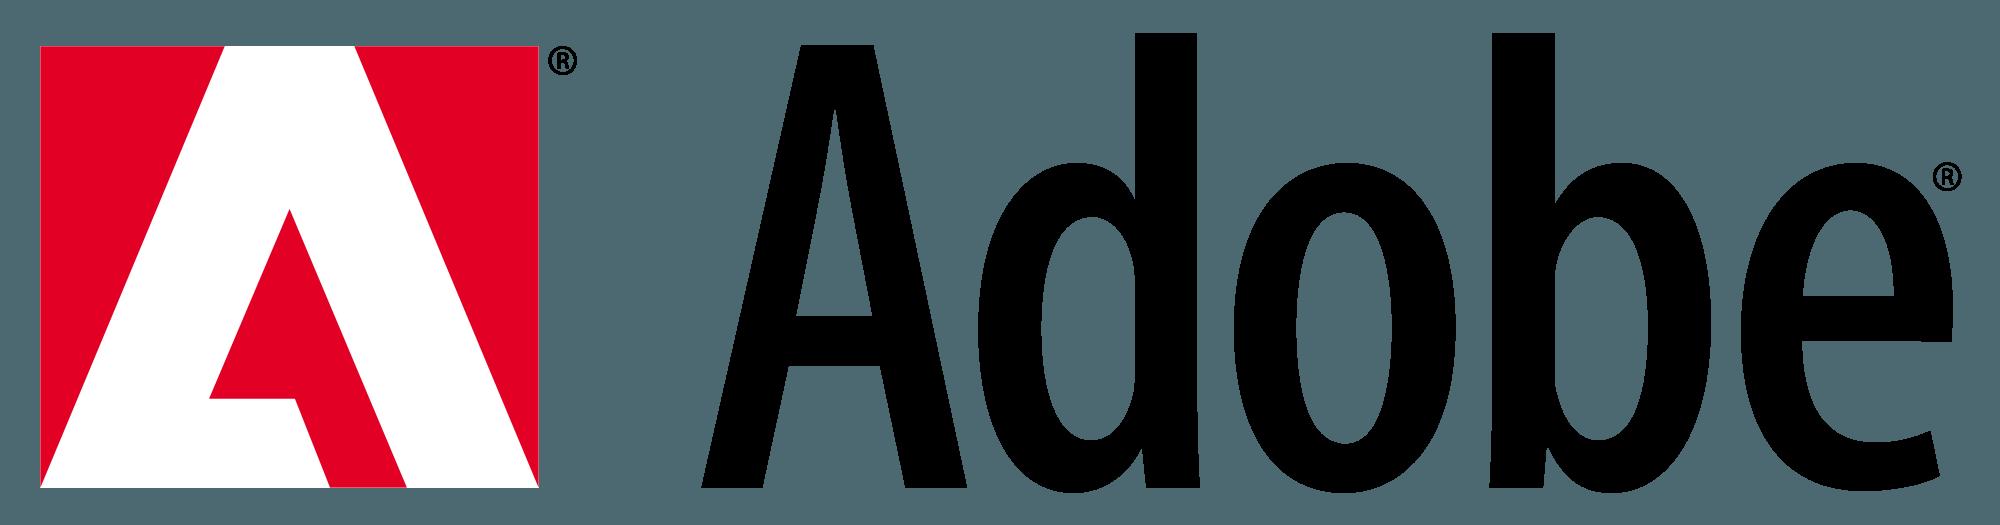 Adobe Systems Download Hd Wallpapers